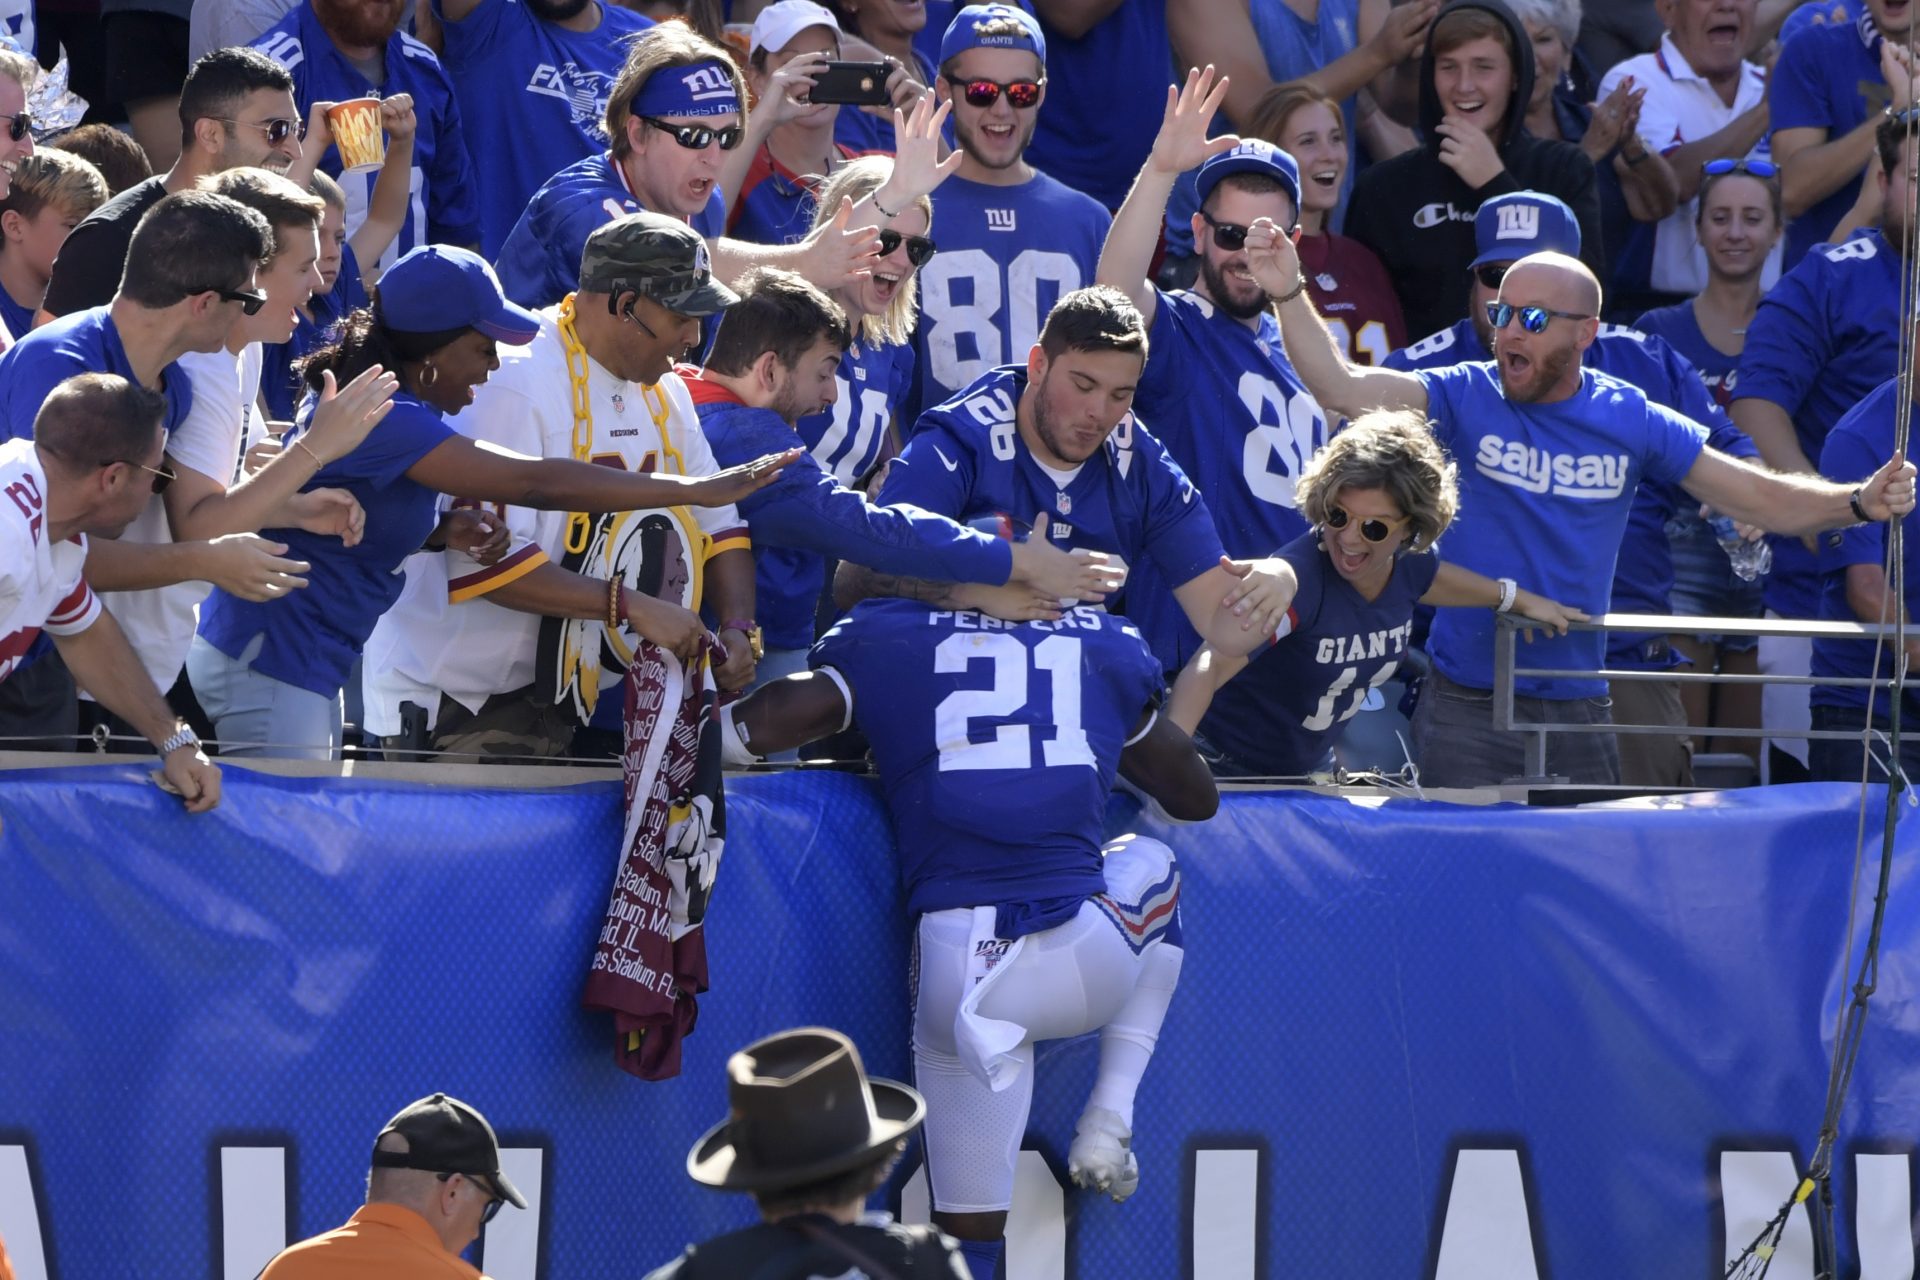 New York Giants free safety Jabrill Peppers celebrates his touchdown with Giants fans during the second half of an NFL football game against the Washington Redskins, Sunday, Sept. 29, 2019, in East Rutherford, N.J. 